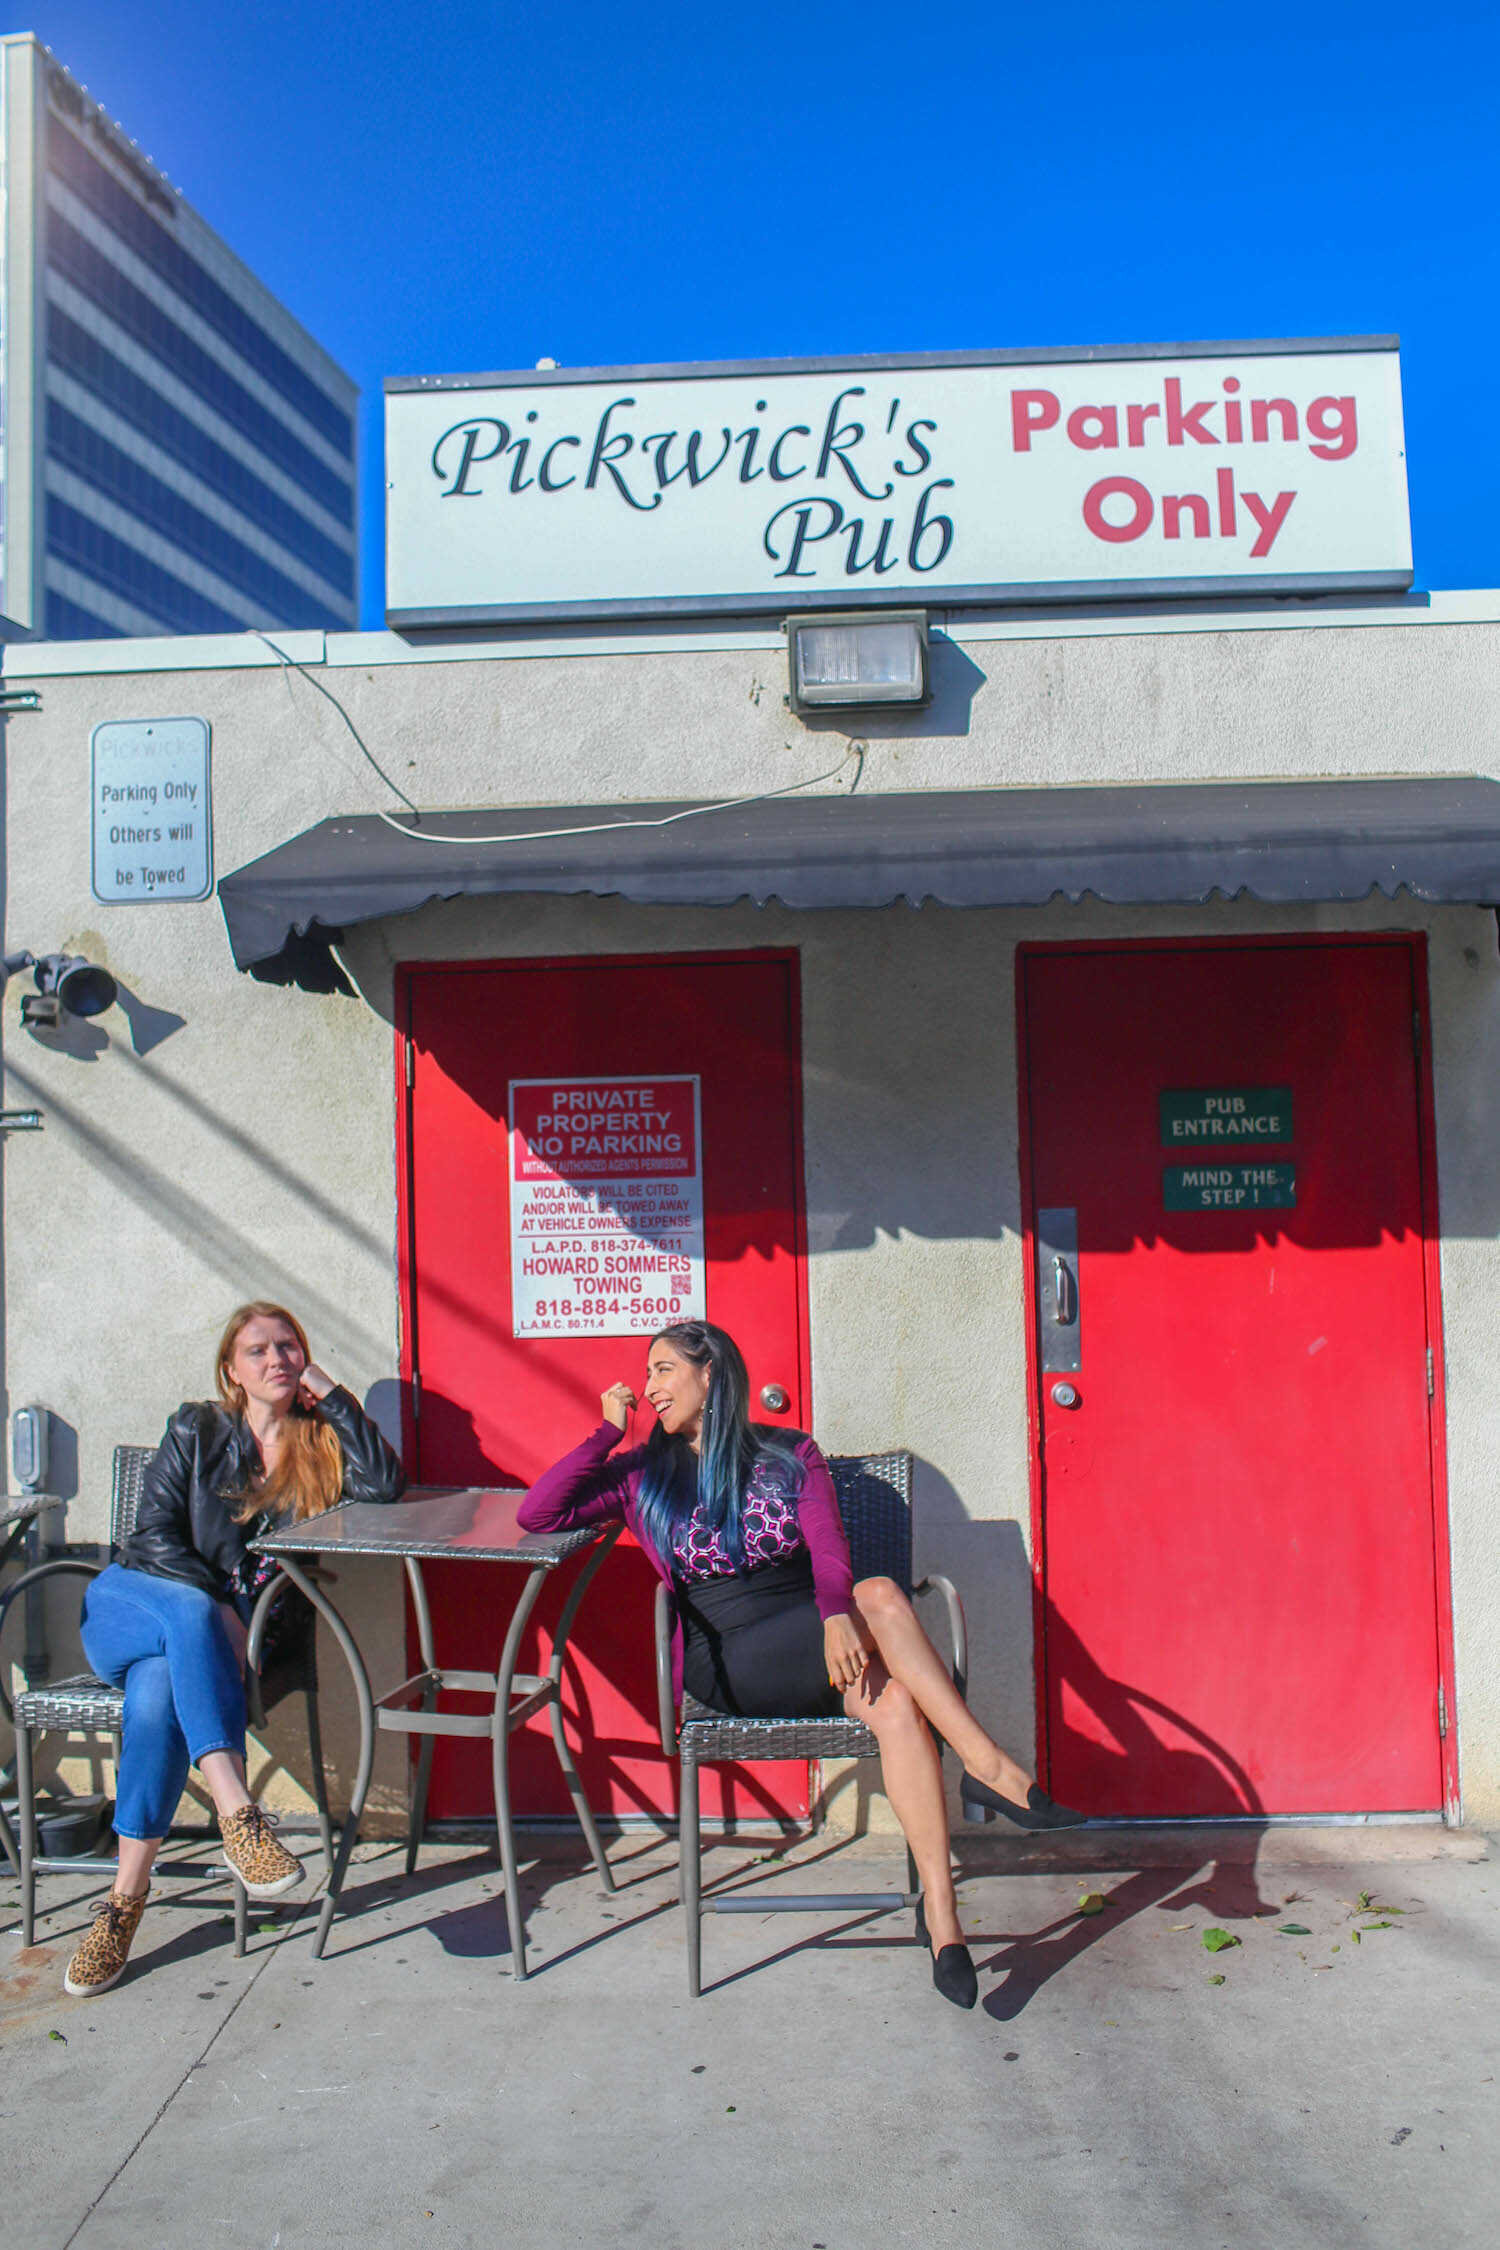 Pickwick's Pub is the real location of Poor Richard's Pub in Woodland Hills.